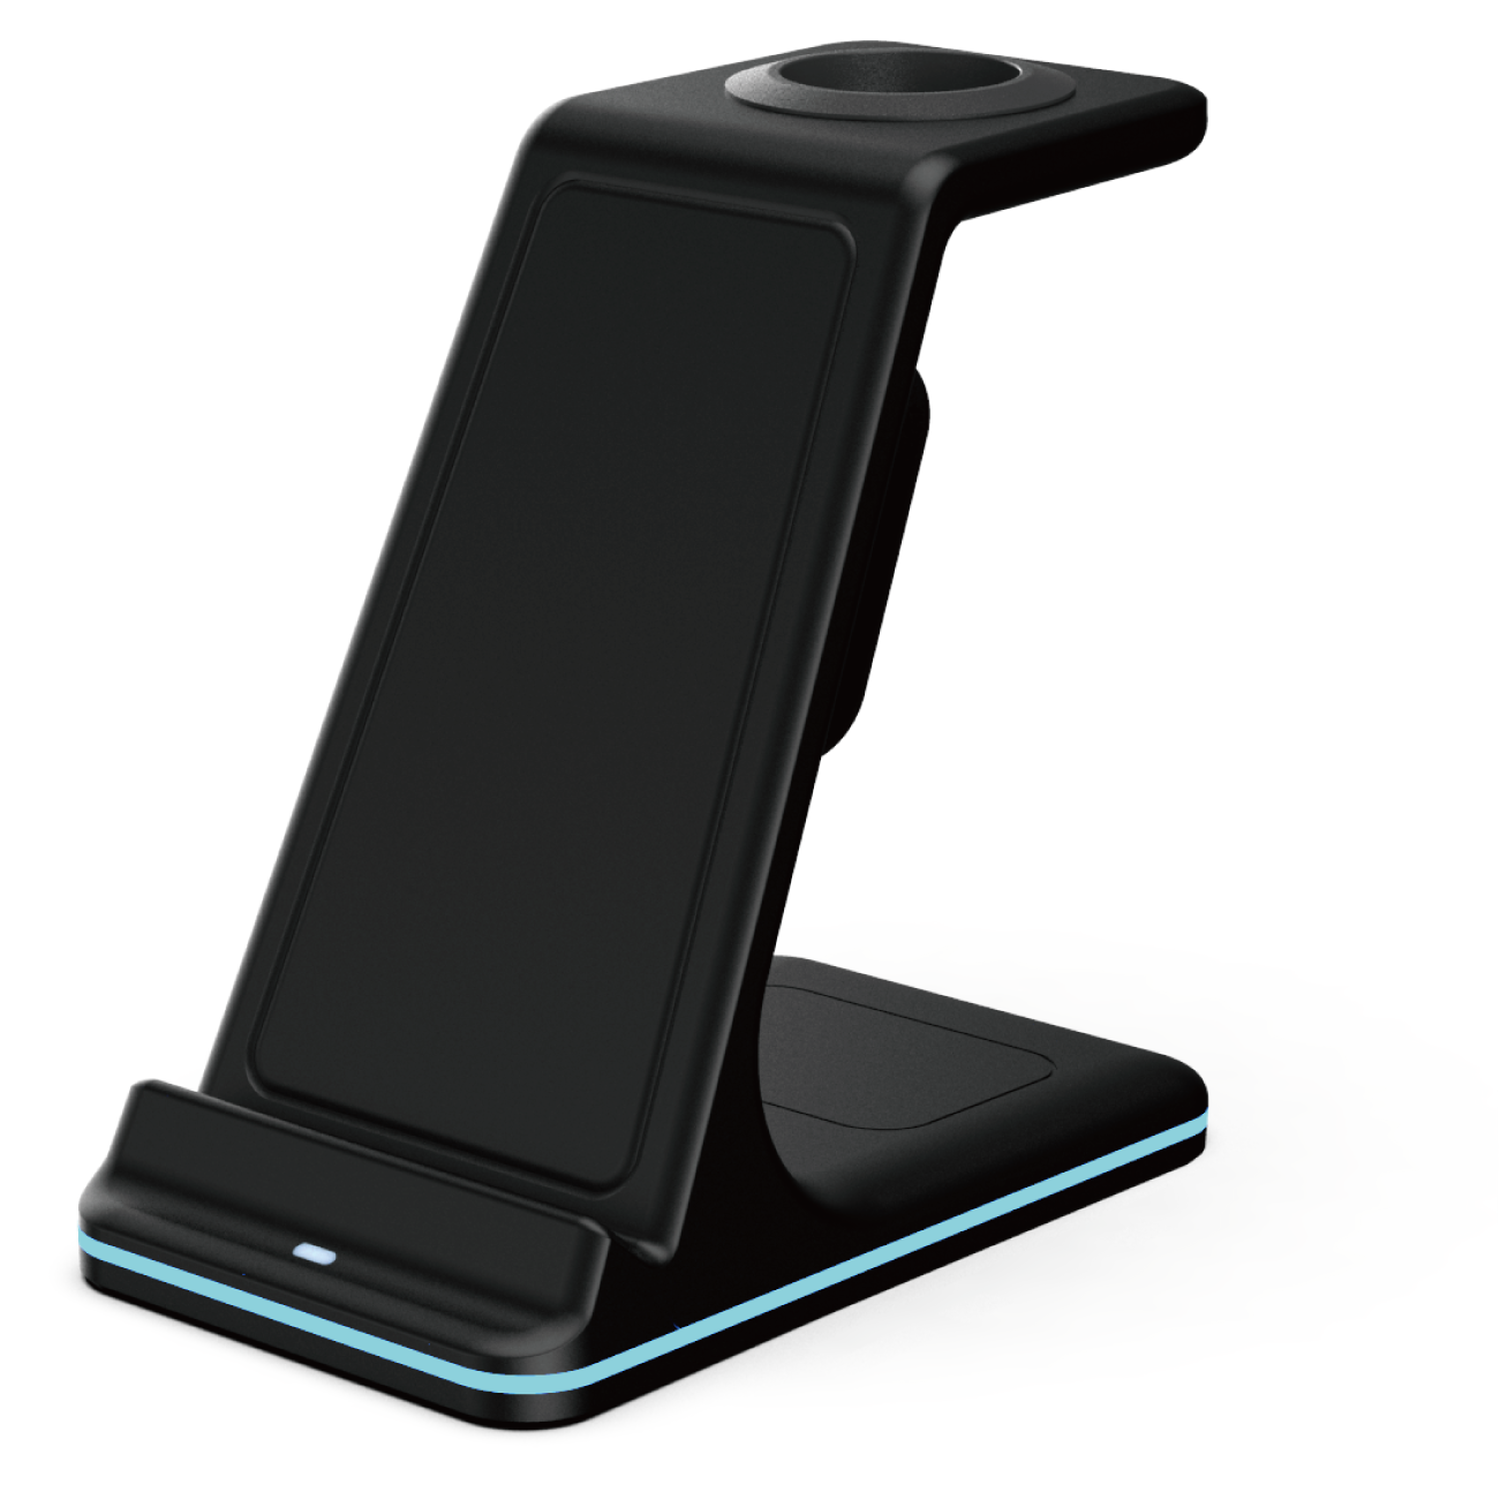 3 in 1 Black Wireless Adaptor and Charging Stand Image 6